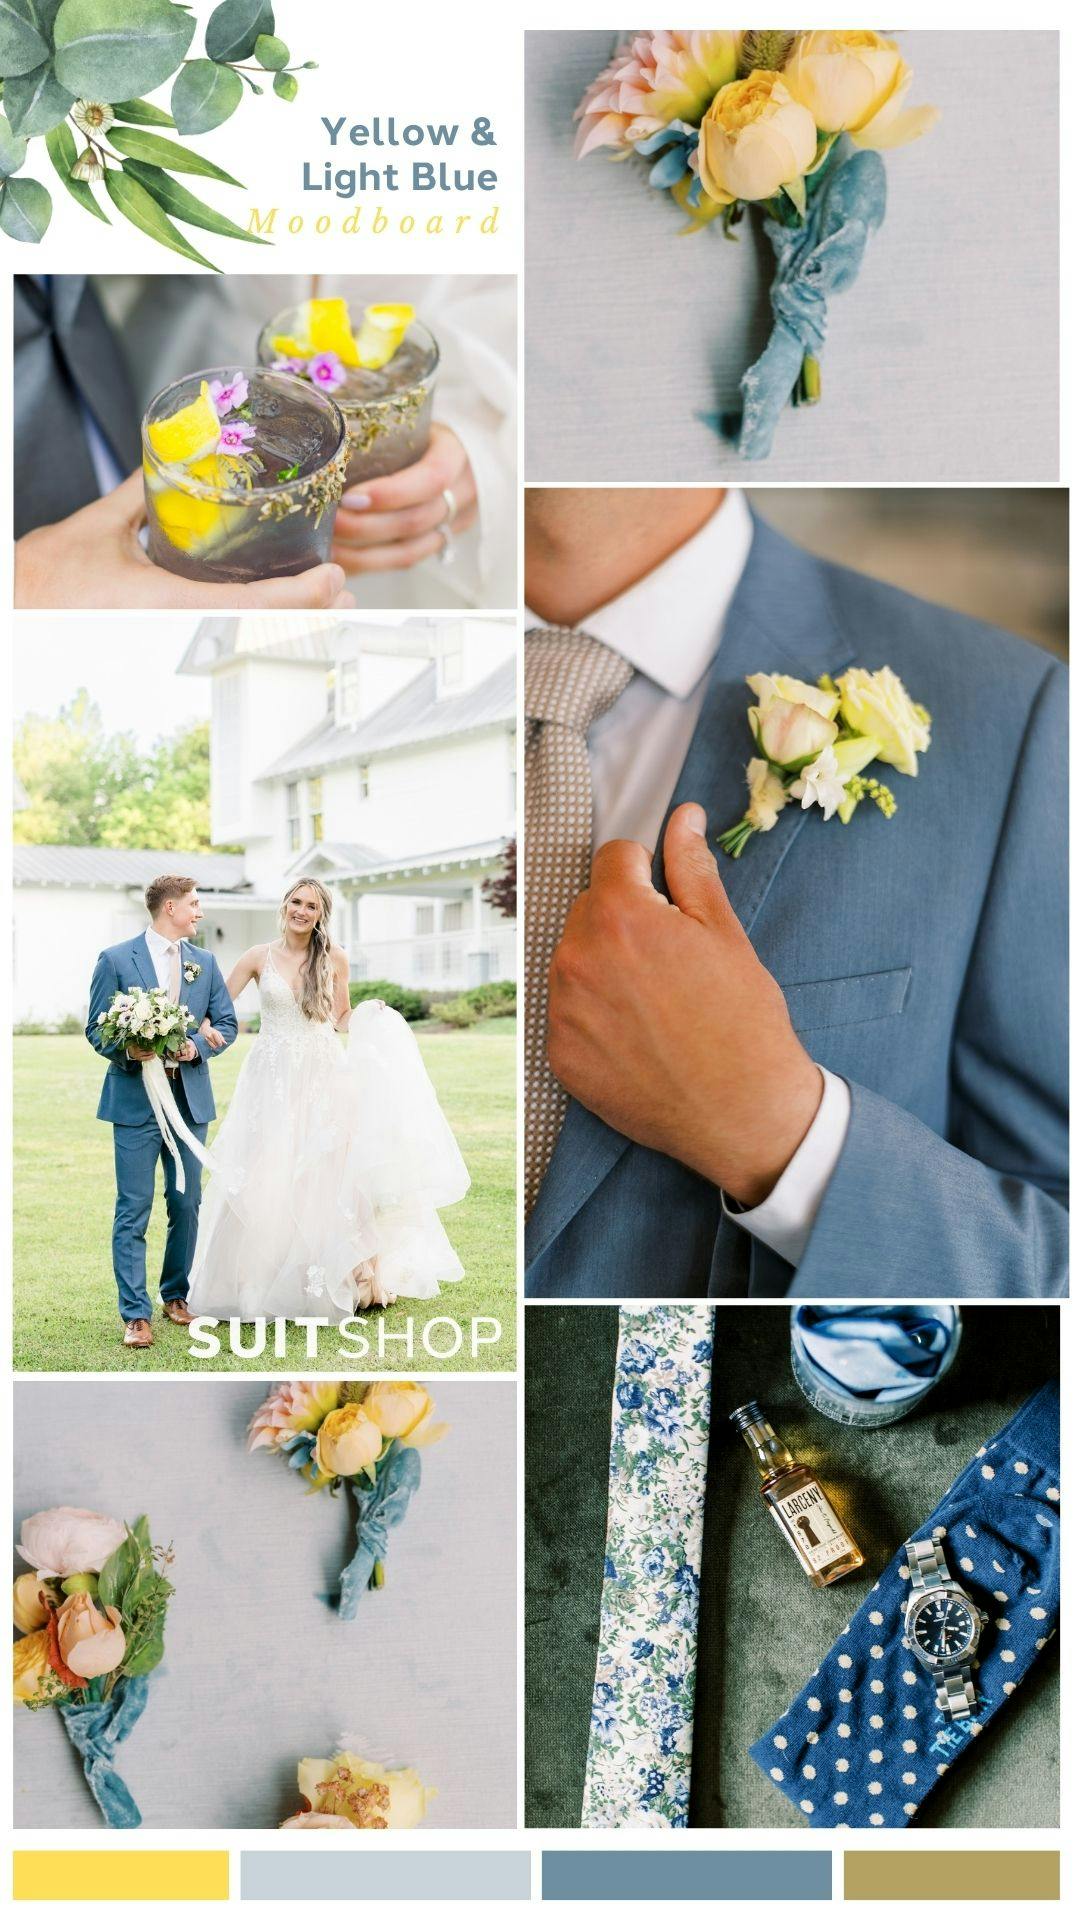 Yellow wedding color combination ideas mood board with a blue and yellow color palette for spring.